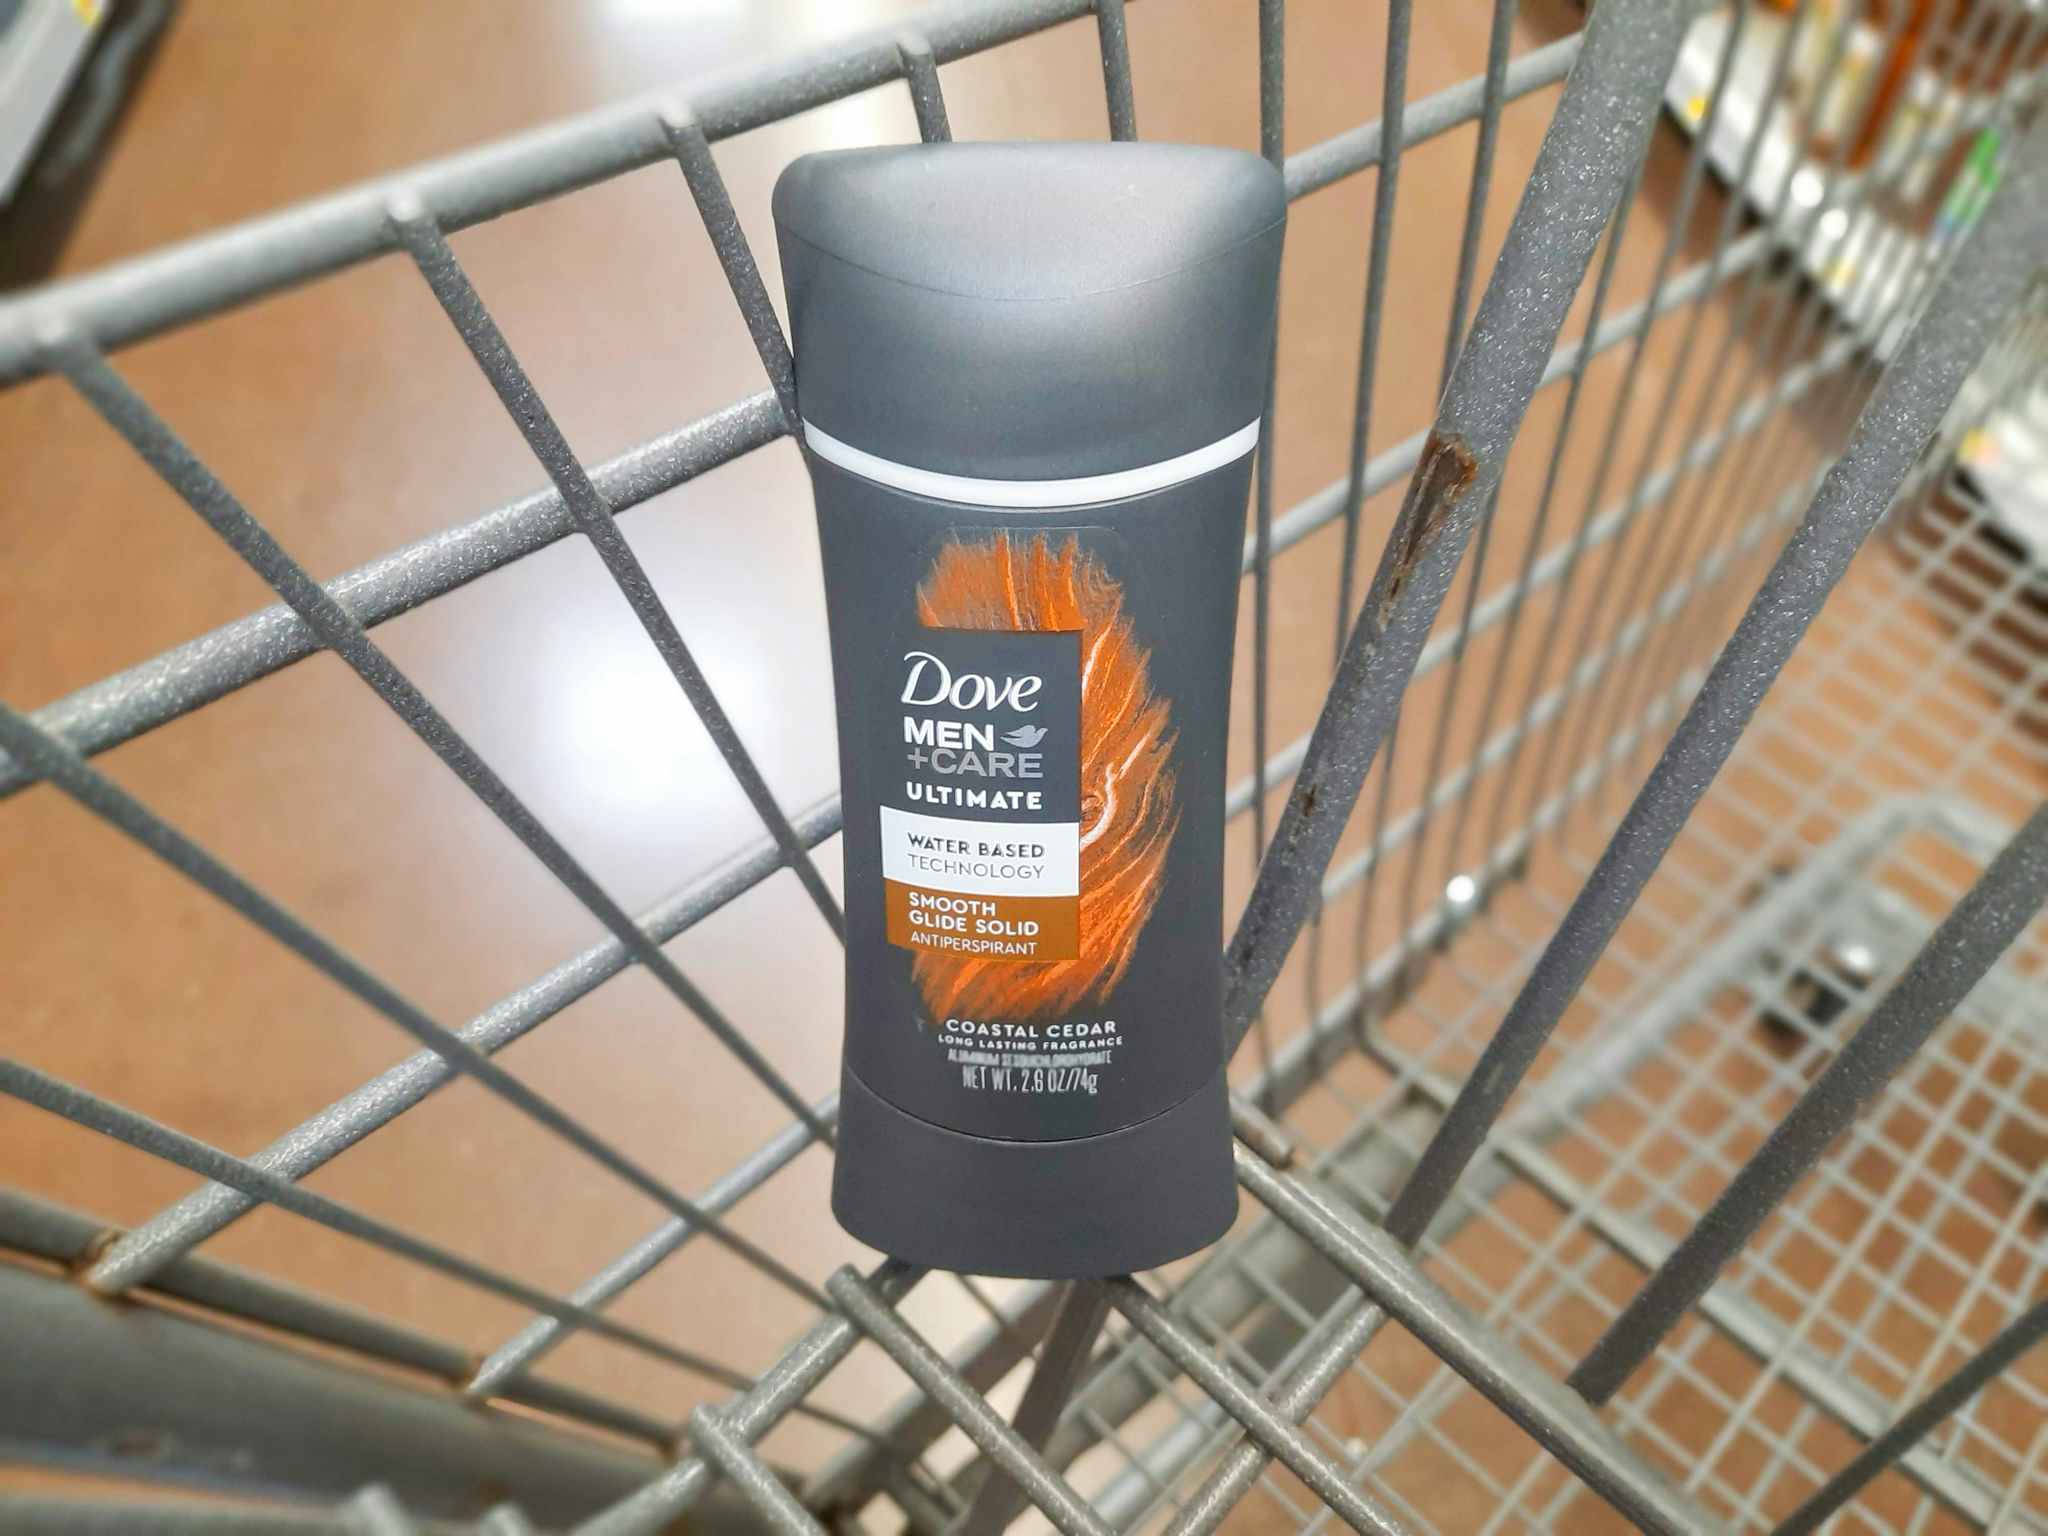 One Dove Men+Care Ultimate Deodorant product in Walmart shopping cart